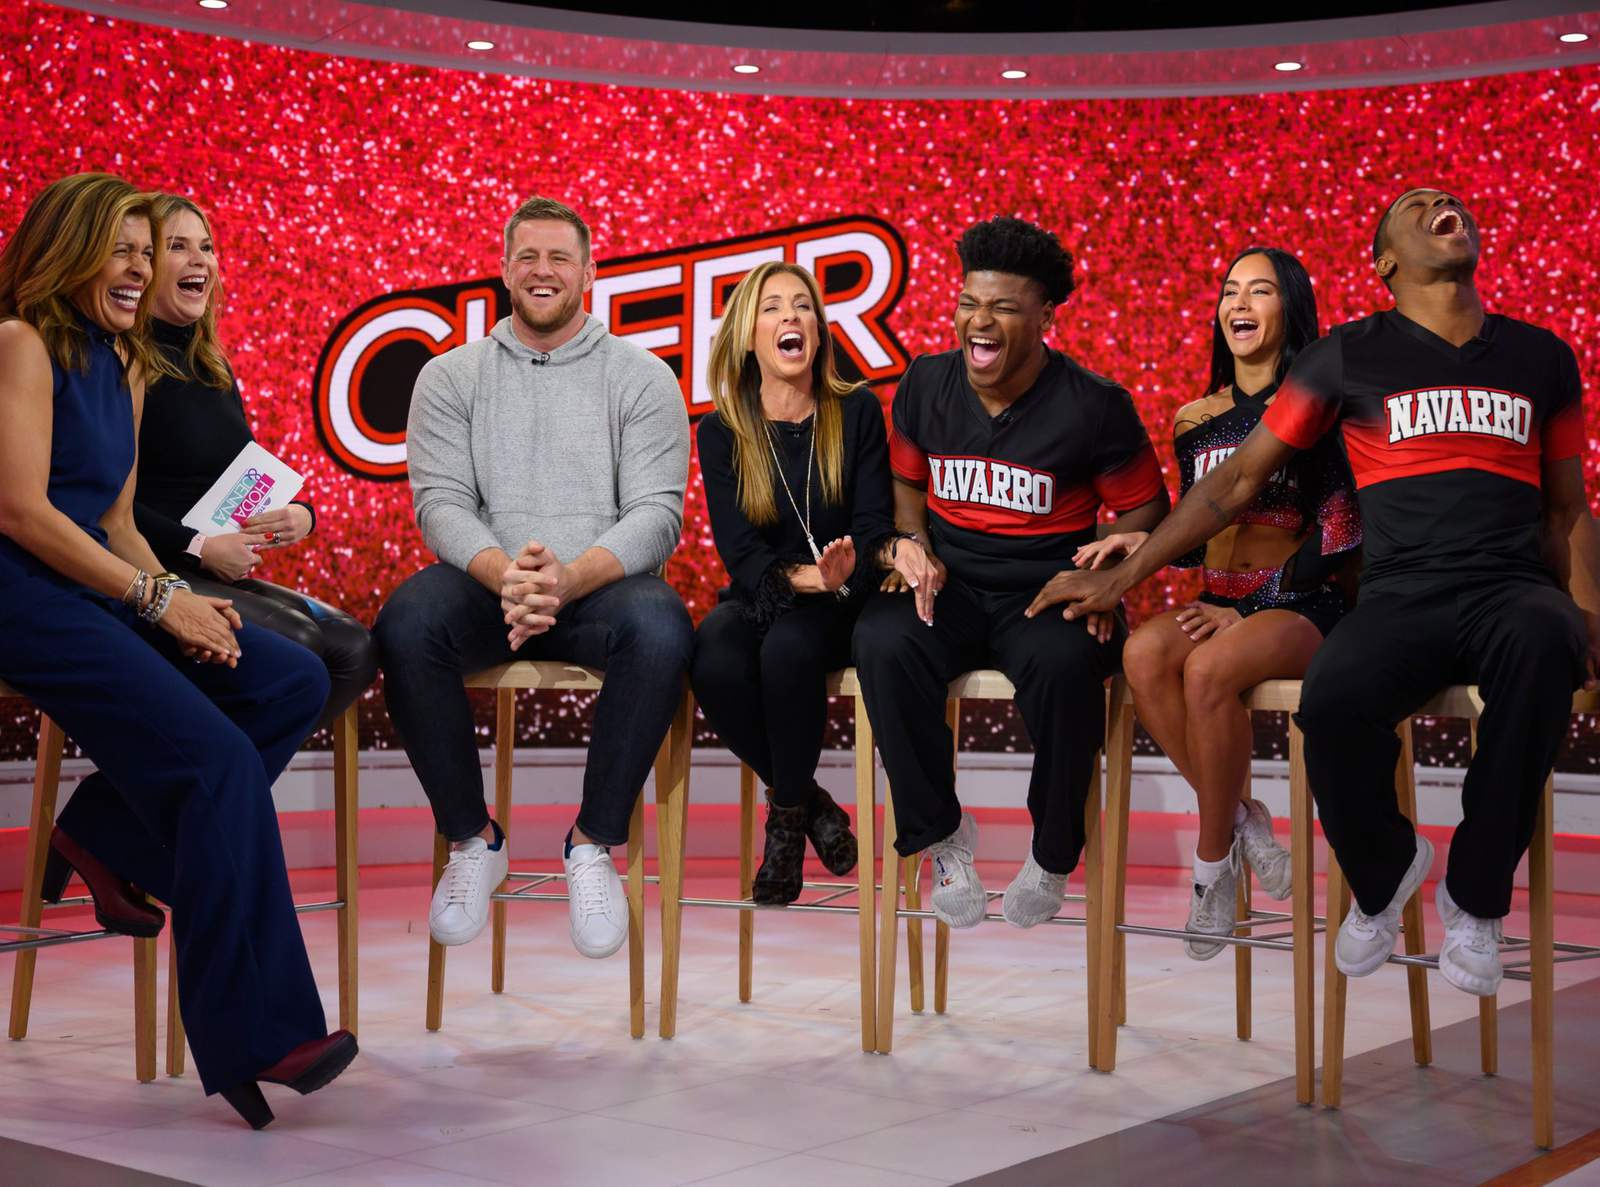 JJ Watt surprises members of the Navarro Cheer team on the ‘Today Show.’ Here’s how they reacted.